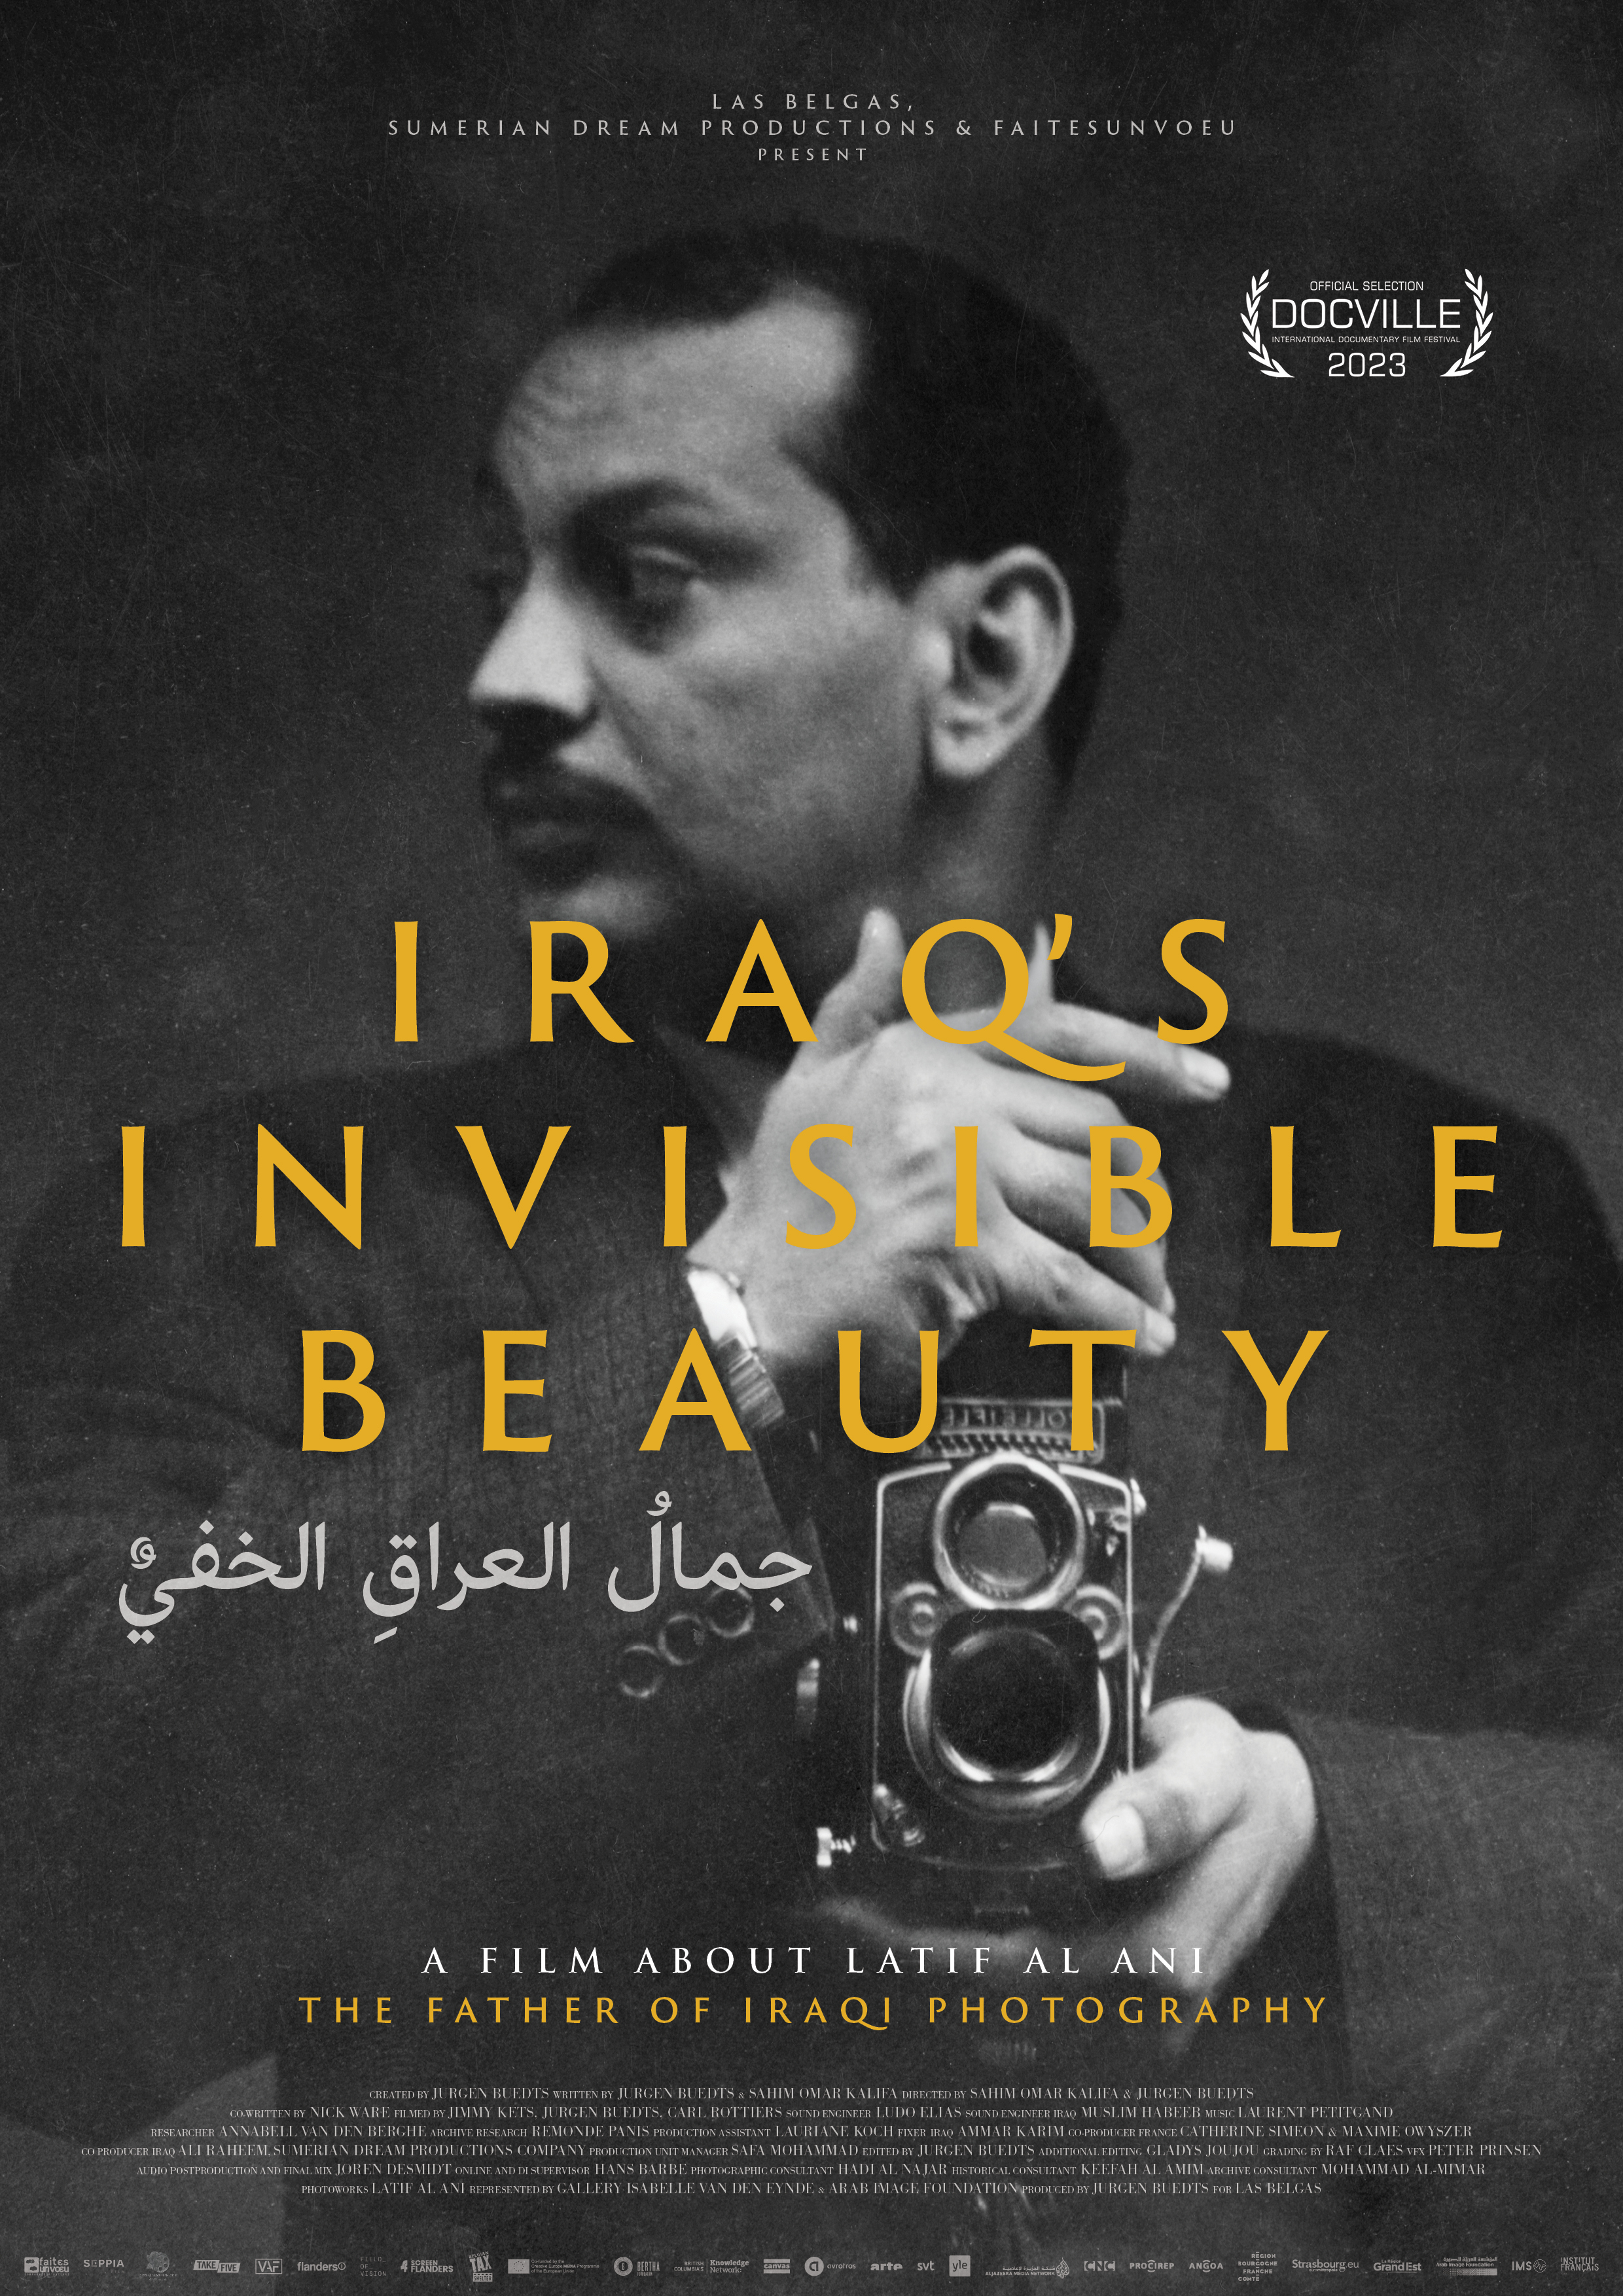 Exhibition Event: Screening of Iraq's Invisible Beauty at NYU's Silver Center